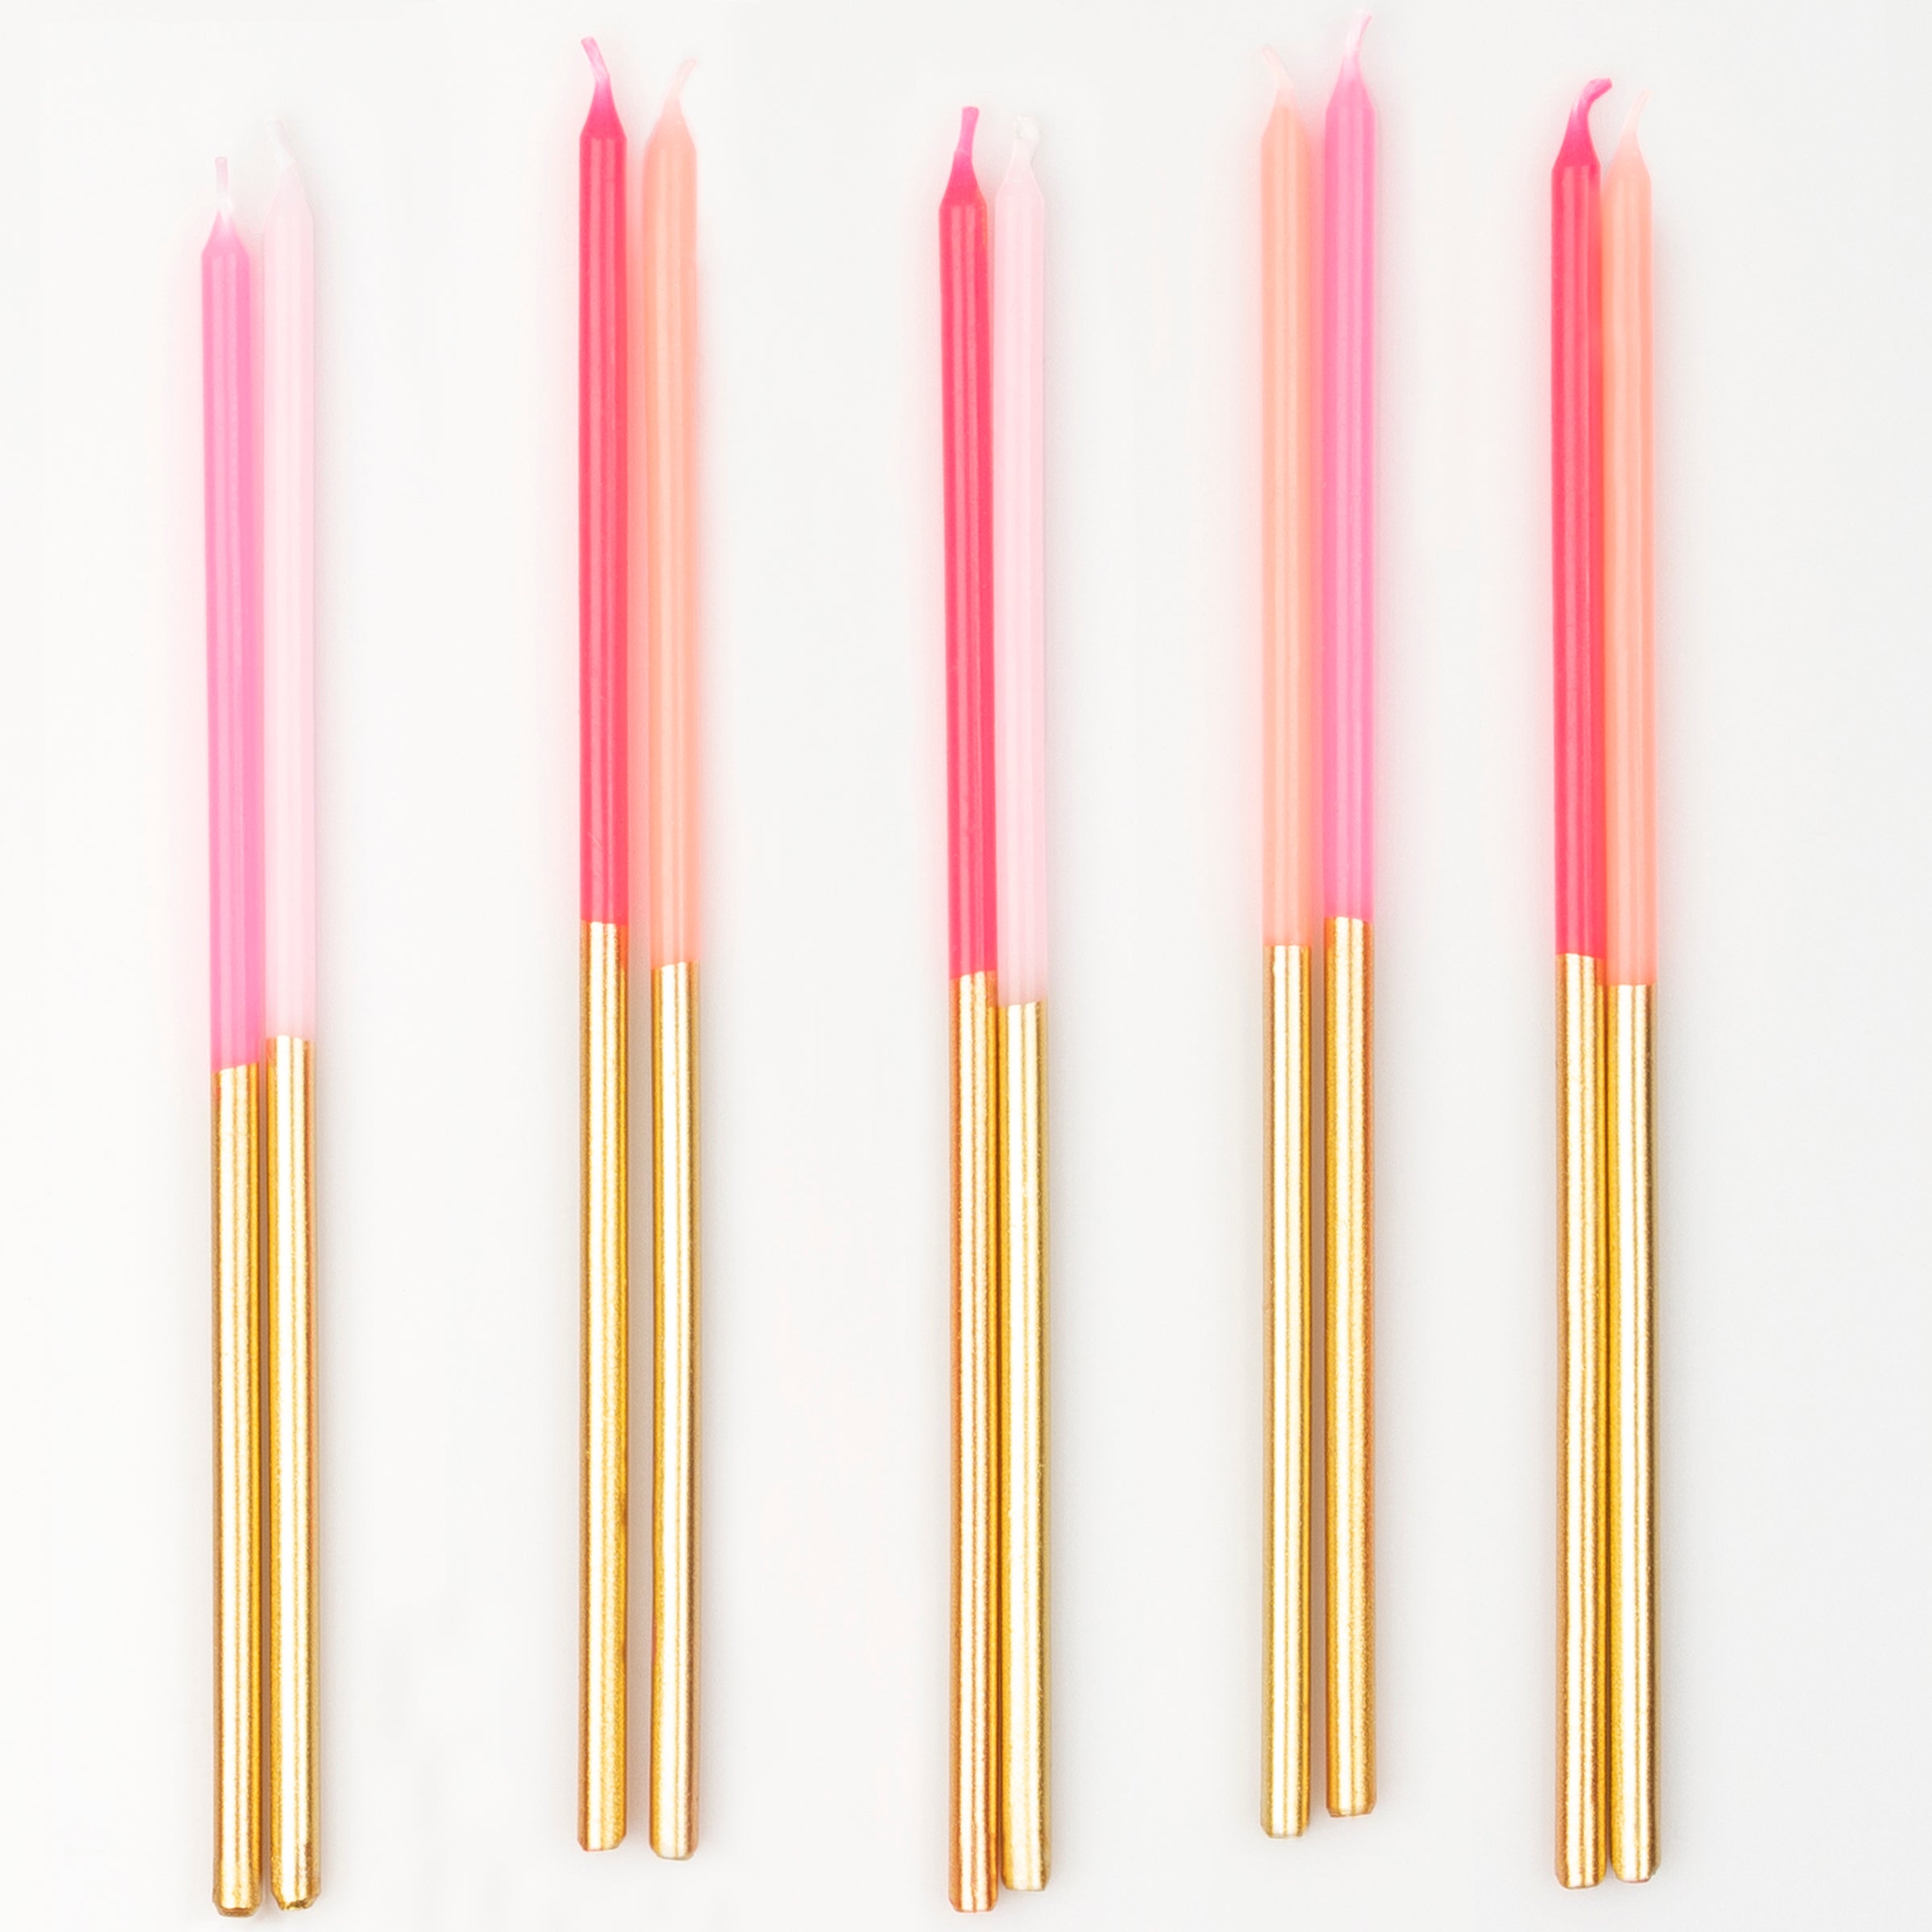 Our gold candles are teamed with shades of pink, perfect as birthday cake candles.